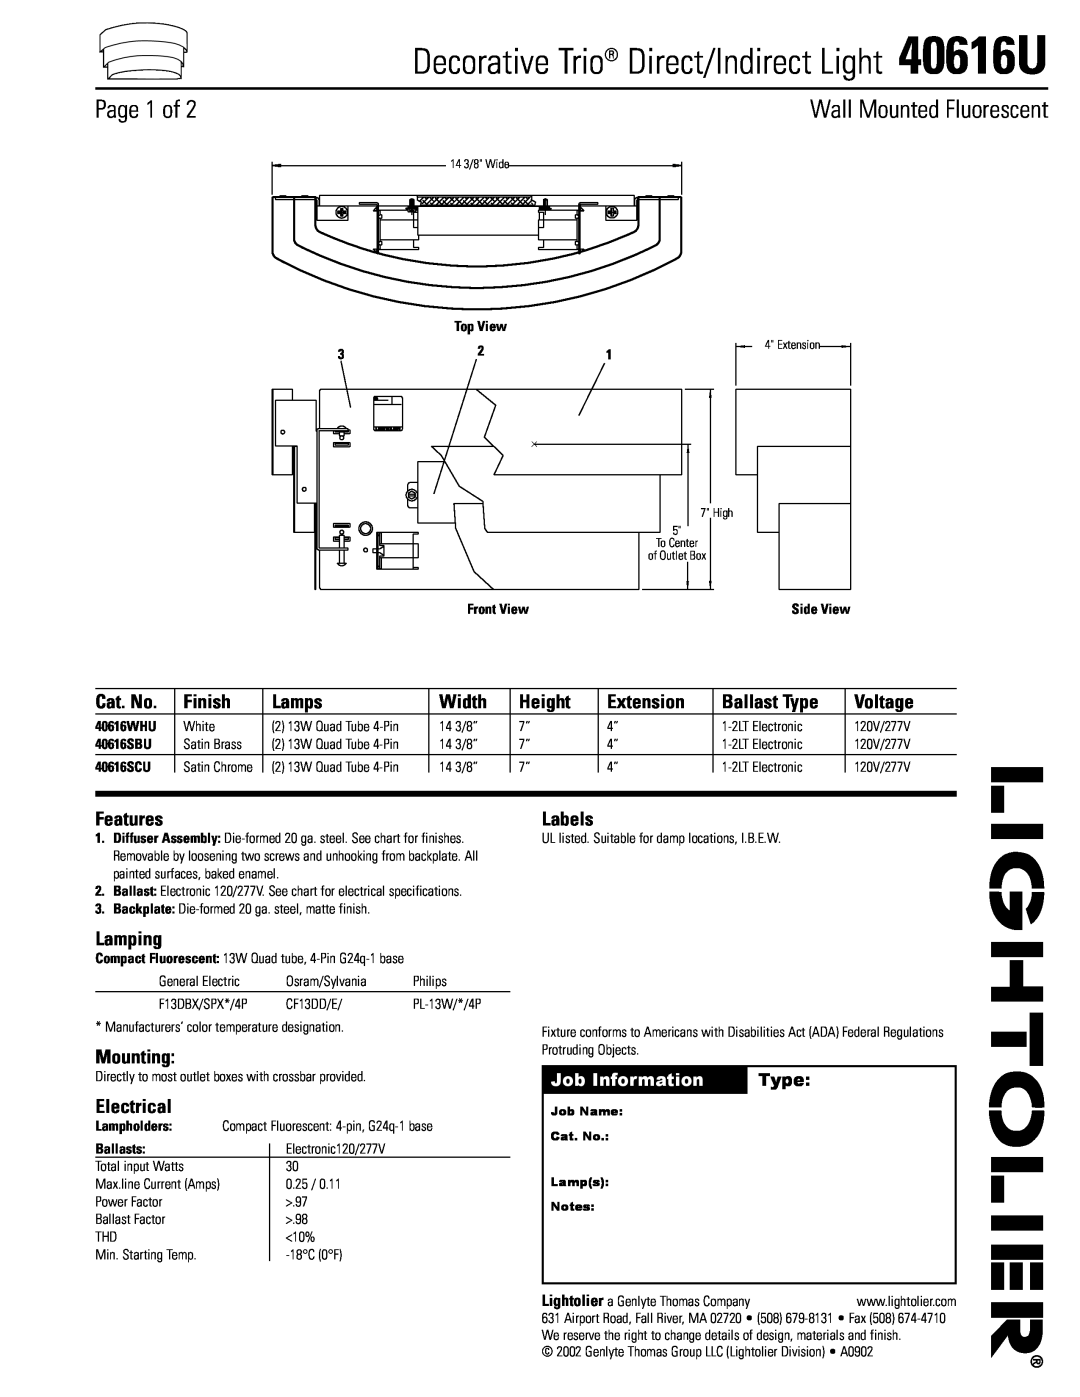 Lightolier specifications Decorative Trio Direct/Indirect Light 40616U, Page 1 of, Wall Mounted Fluorescent, Cat. No 